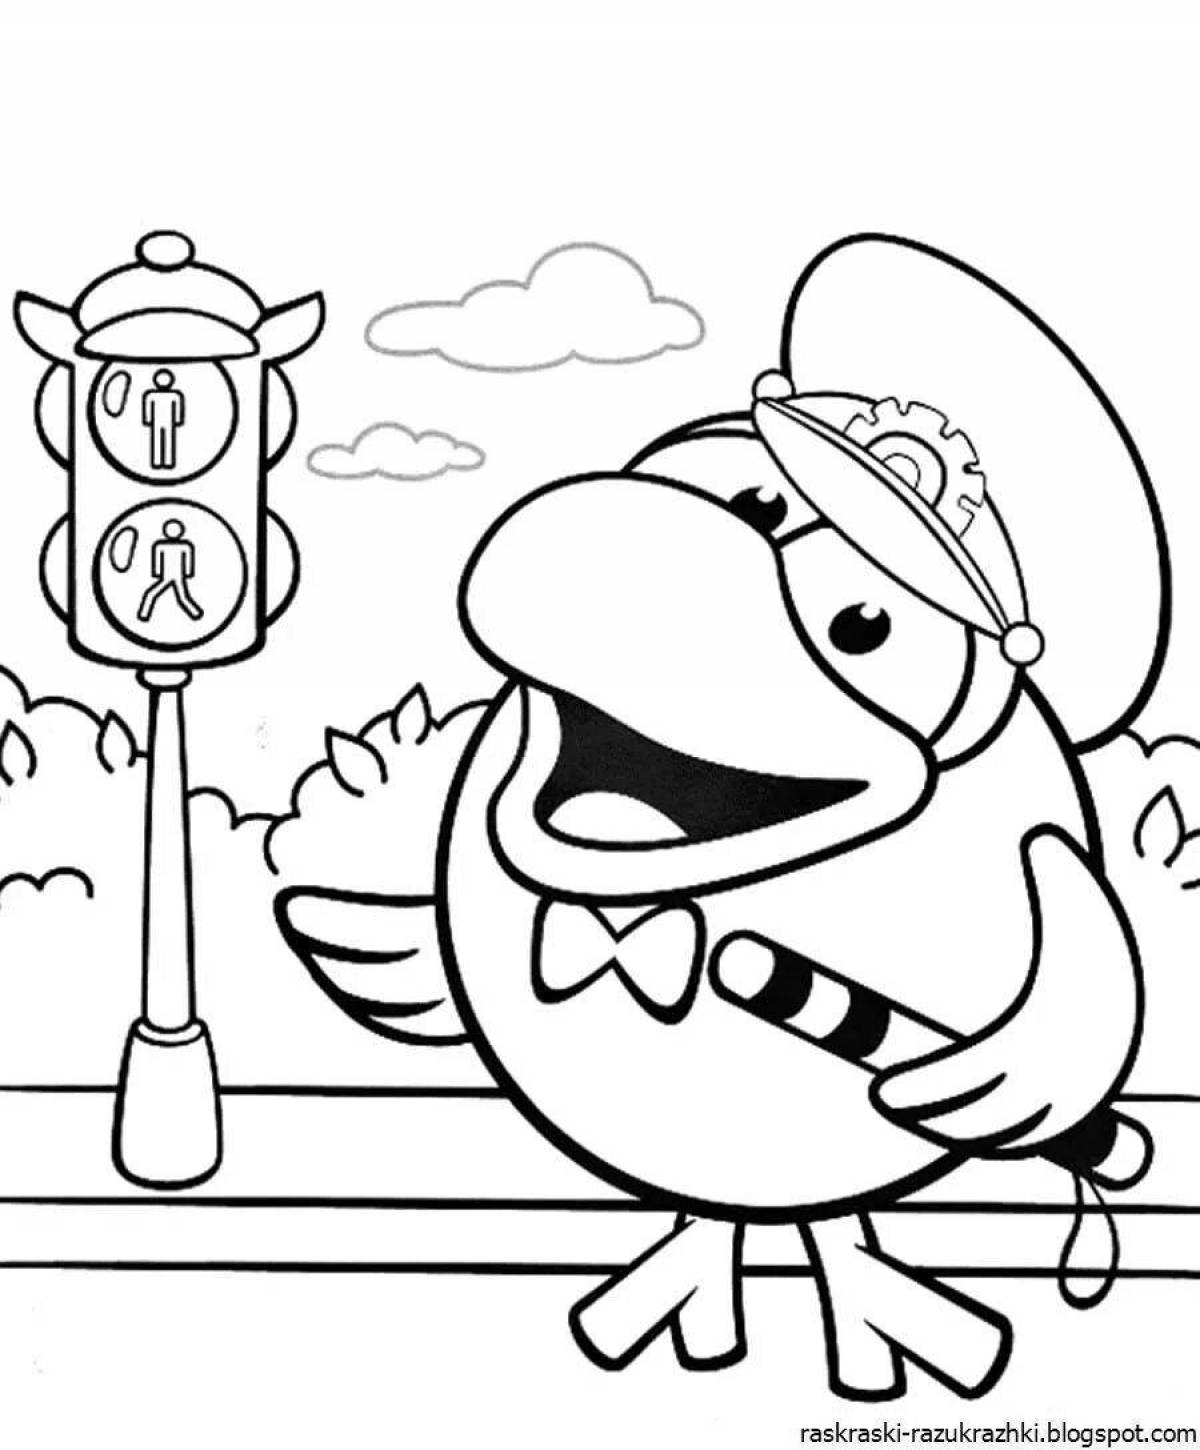 Cute 1st grade traffic rules coloring page